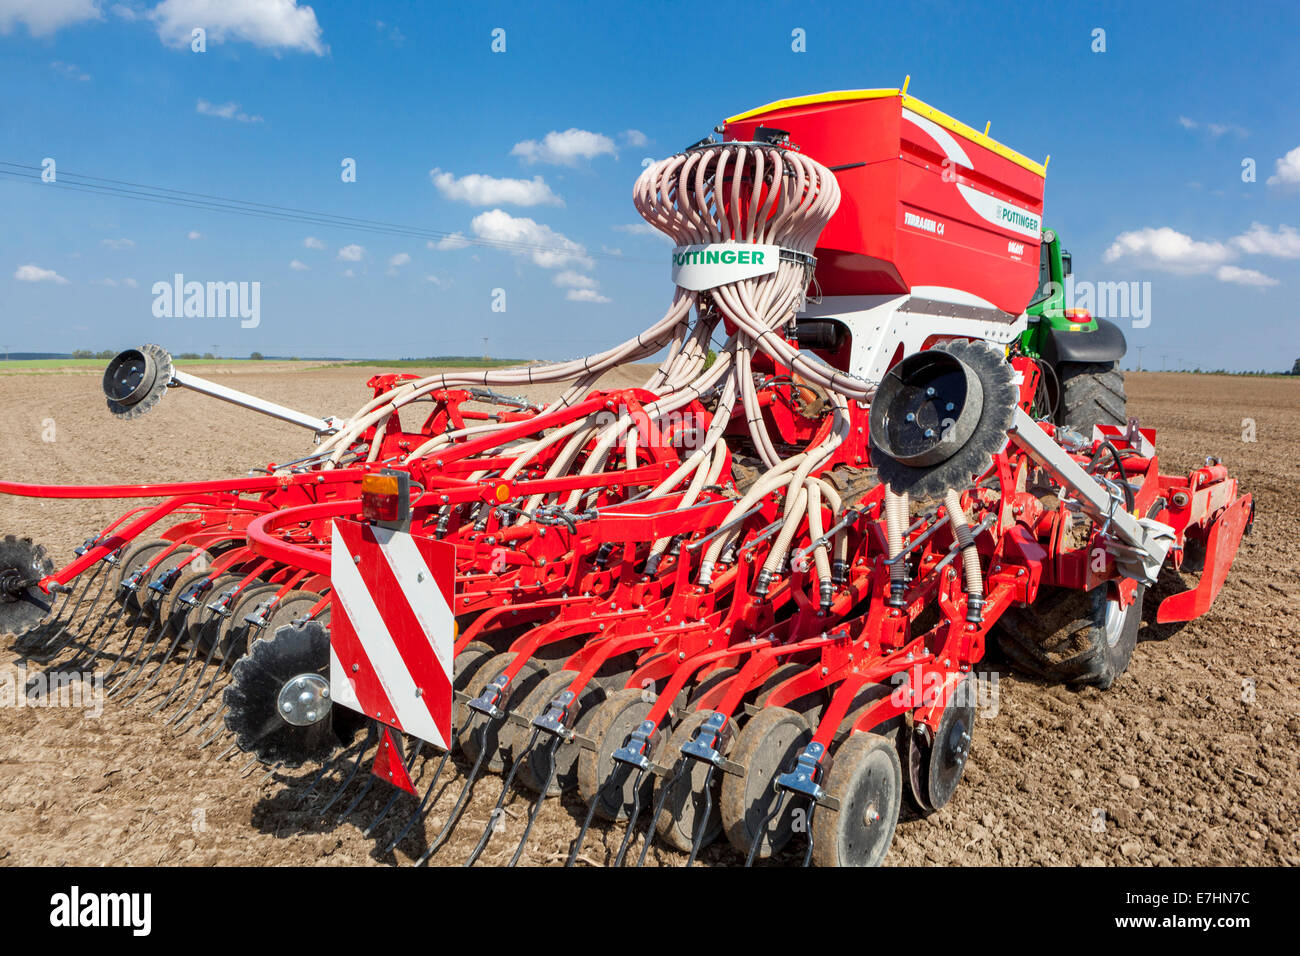 Sowing machine Seed Drill Pottinger sowing grain of wheat on a field Czech Republic farmer seeder hopper Stock Photo